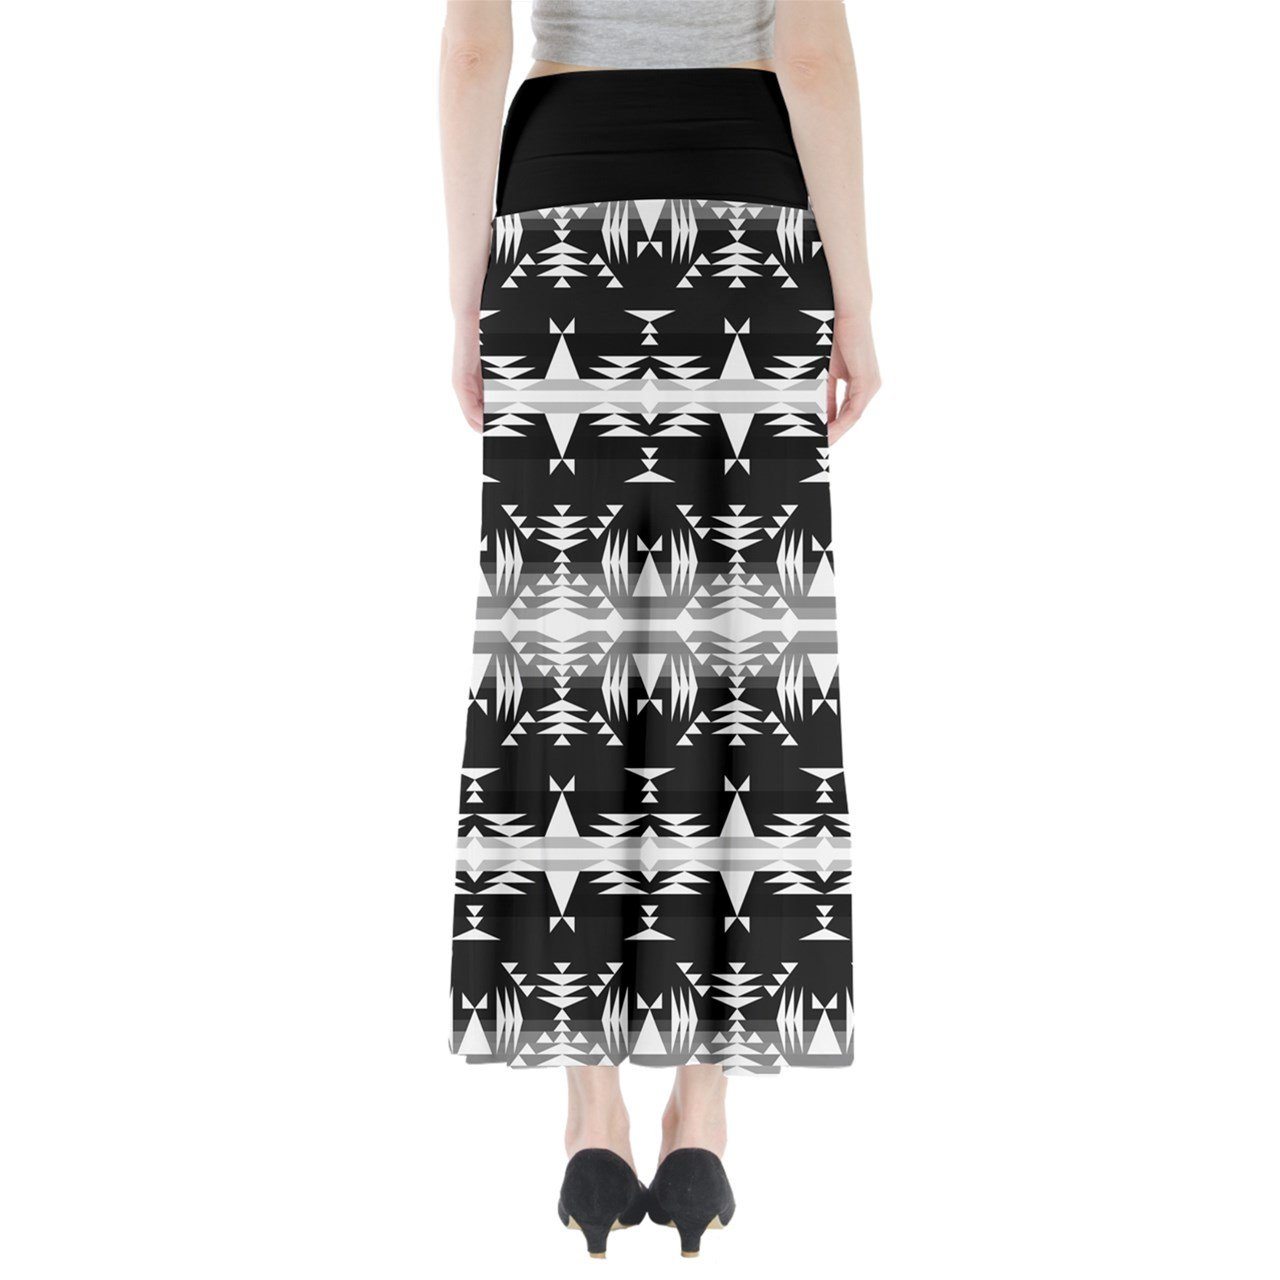 Between the Mountains Black and White Full Length Maxi Skirt skirts 49 Dzine 